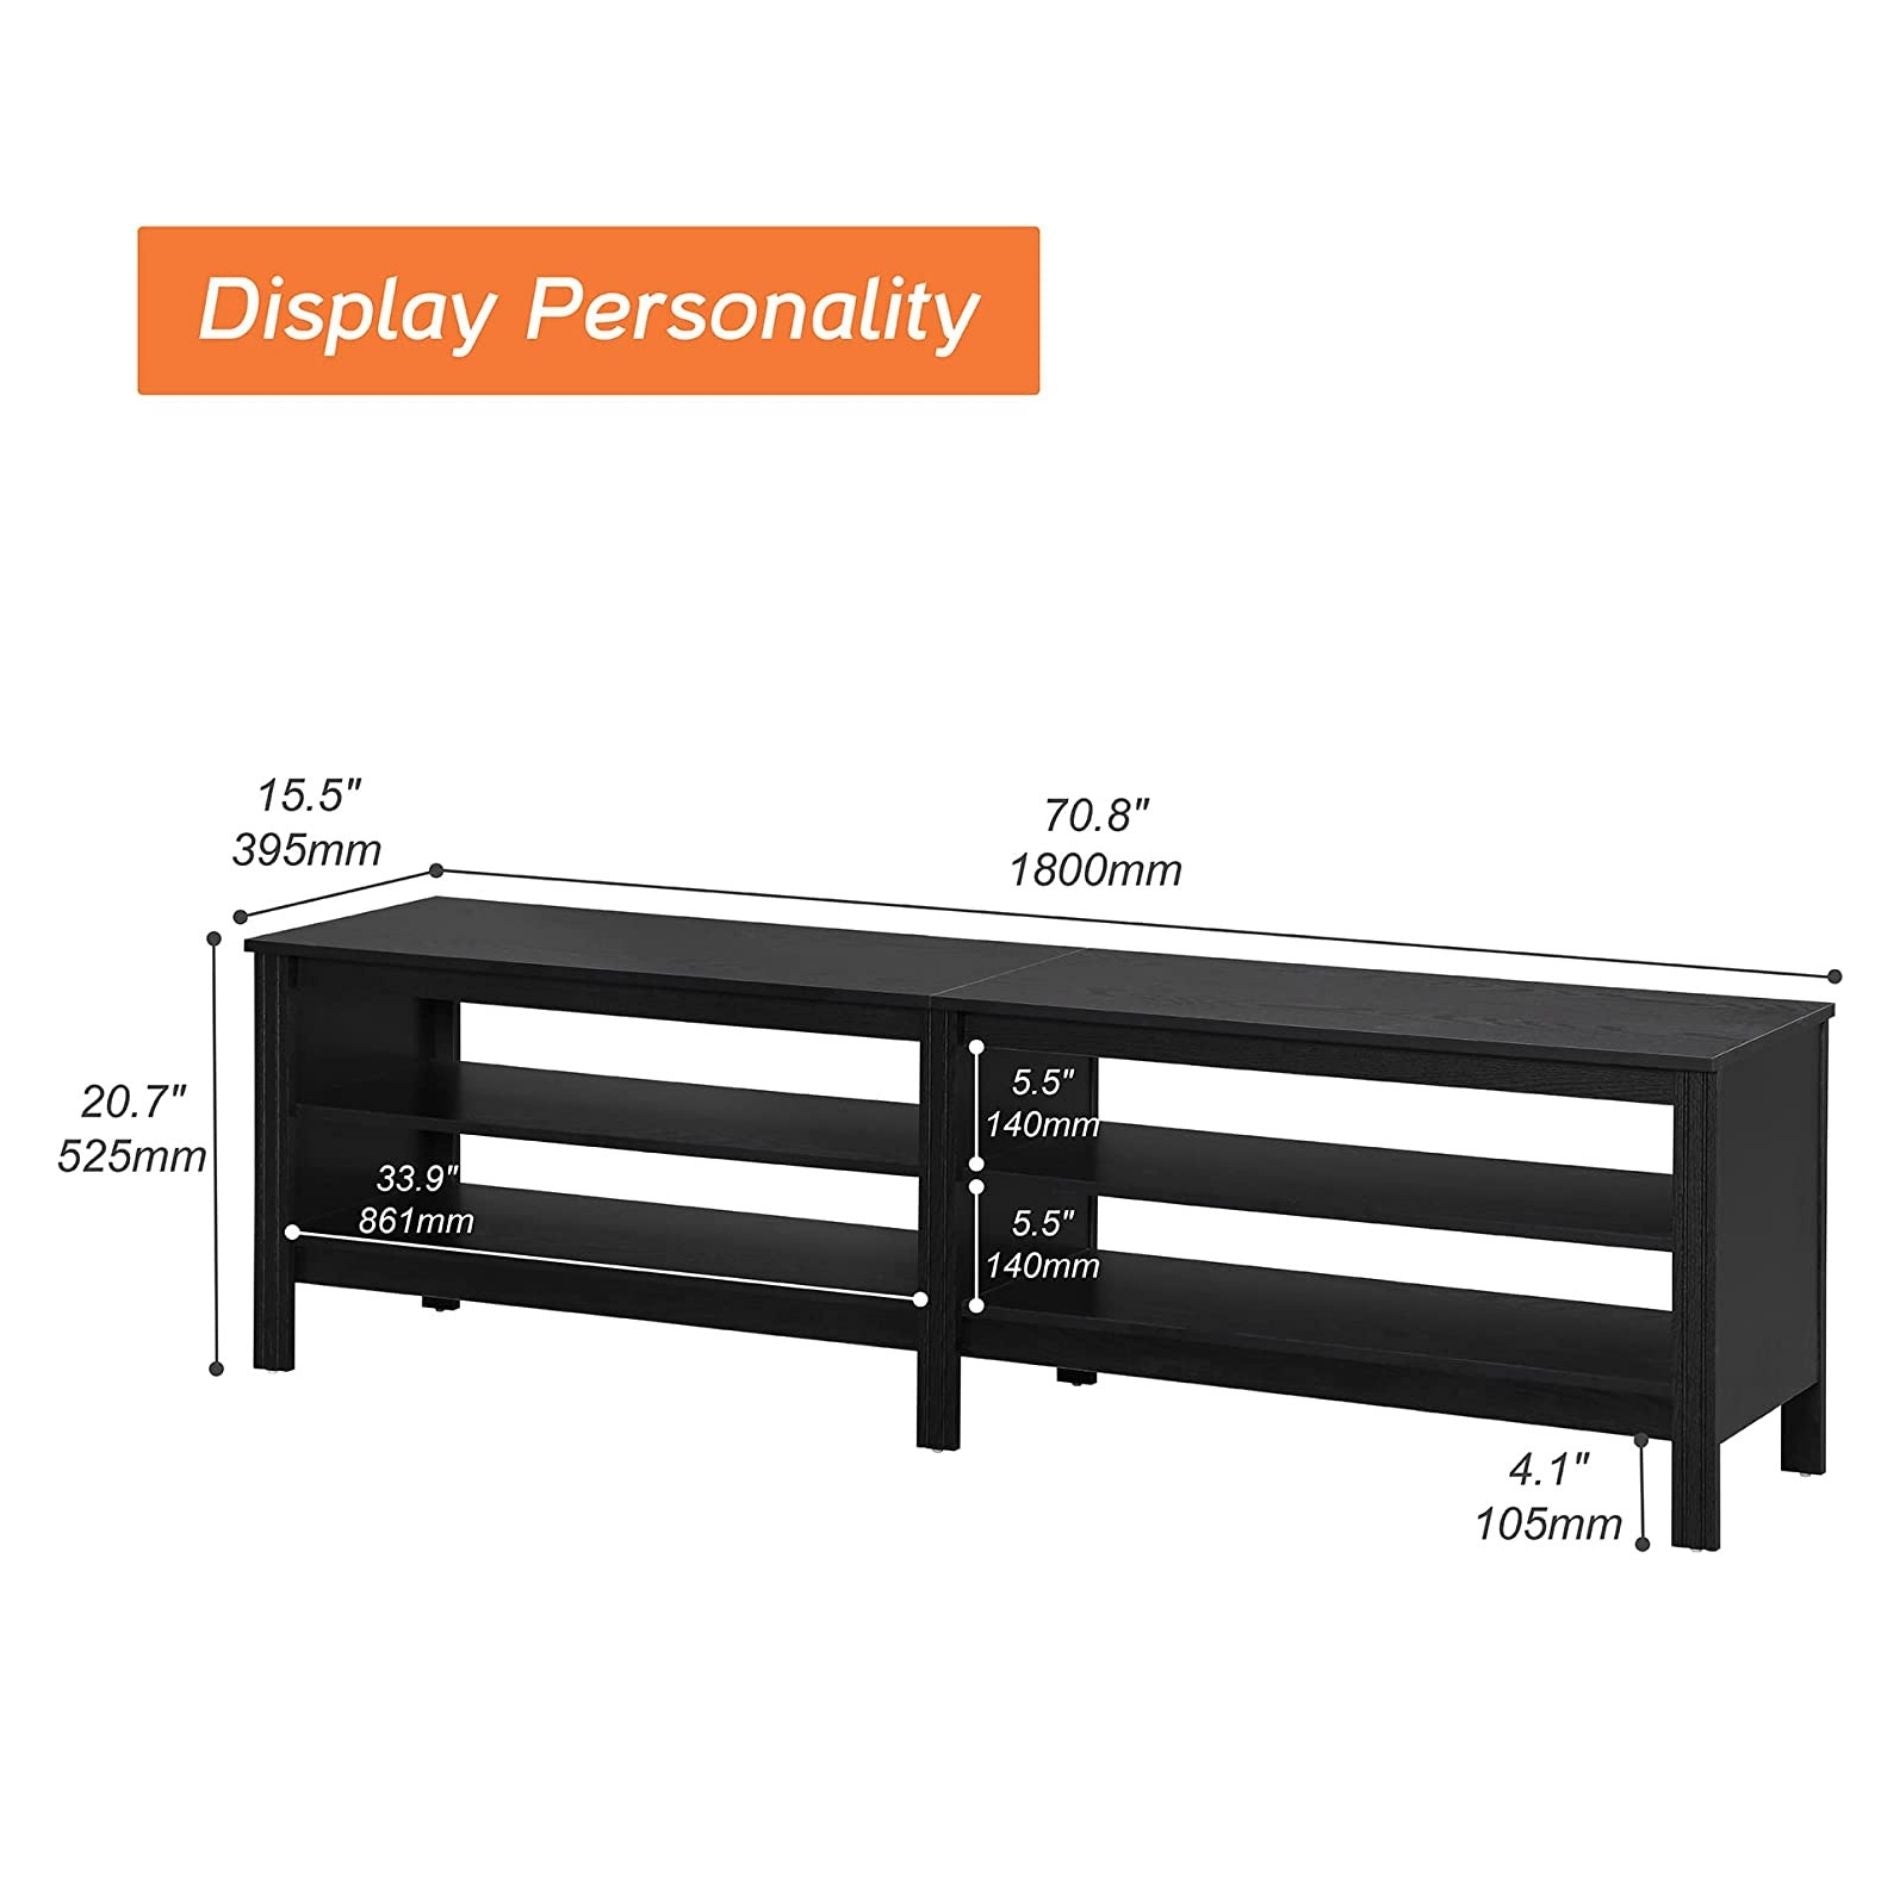 WAMPAT 70" TV Stand for 75 Inch TV Entertainment Center, Black Wood TV Console Media Table with 4 Cubby Storage